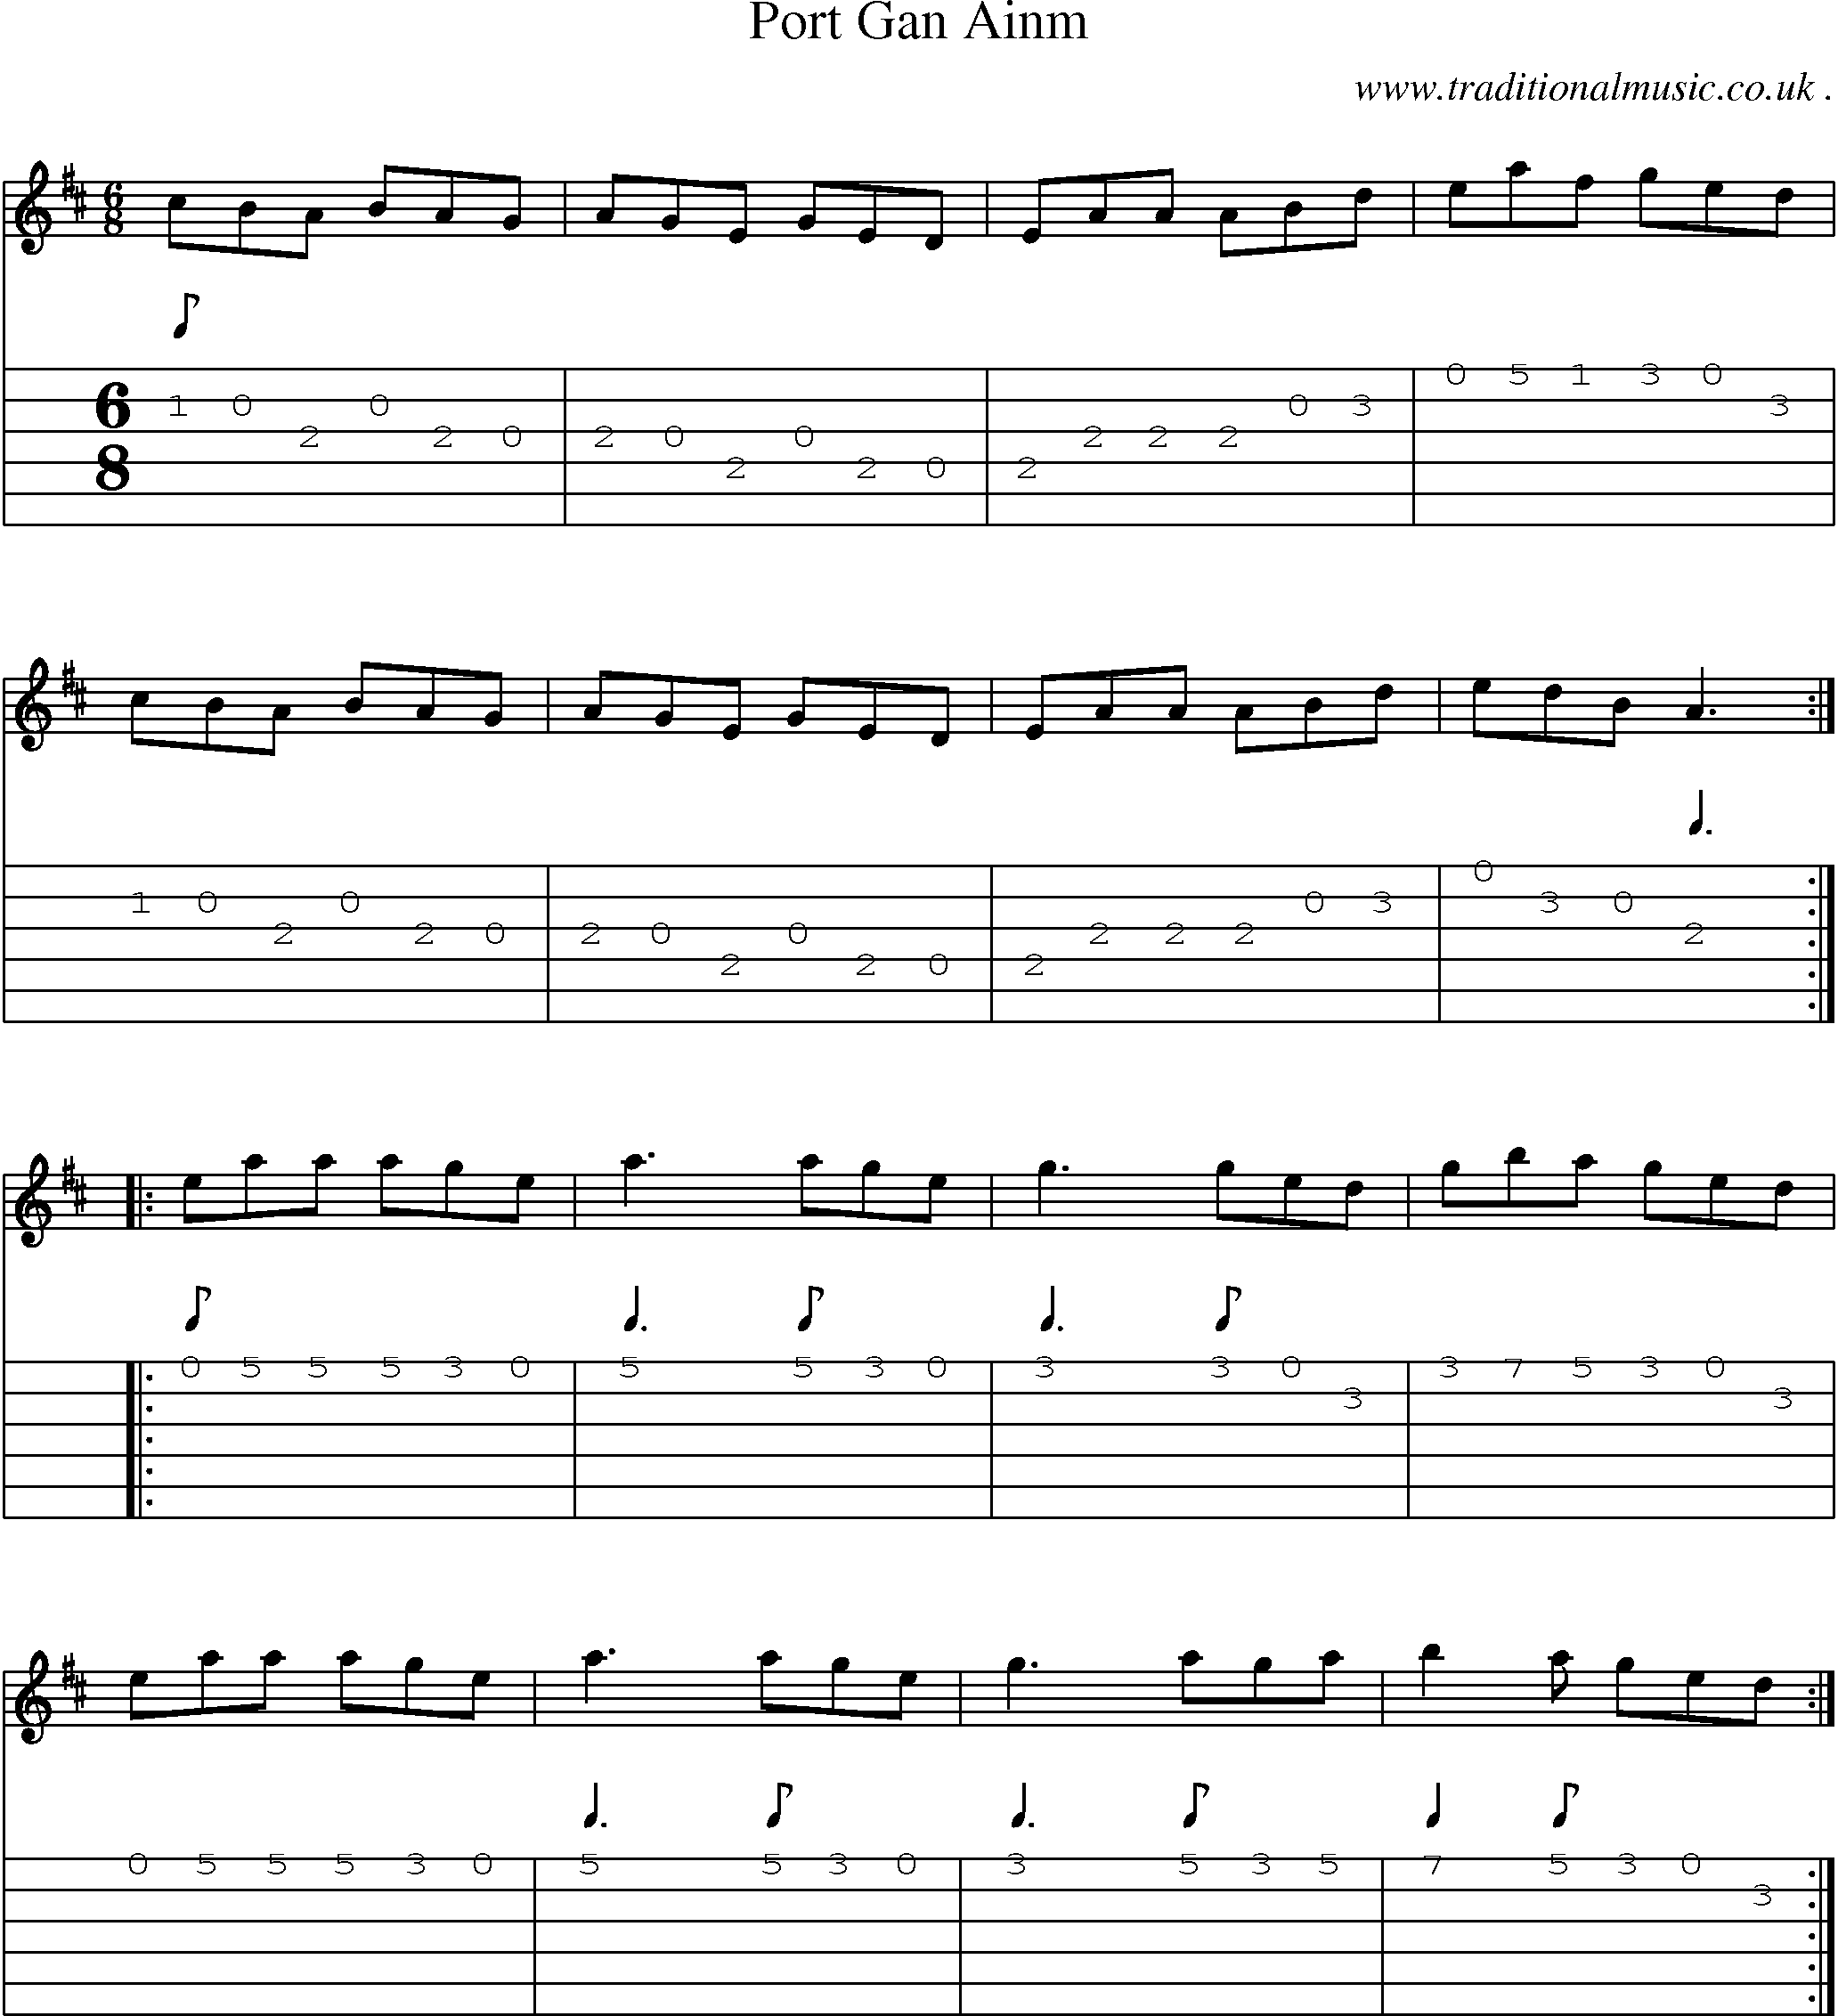 Sheet-Music and Guitar Tabs for Port Gan Ainm